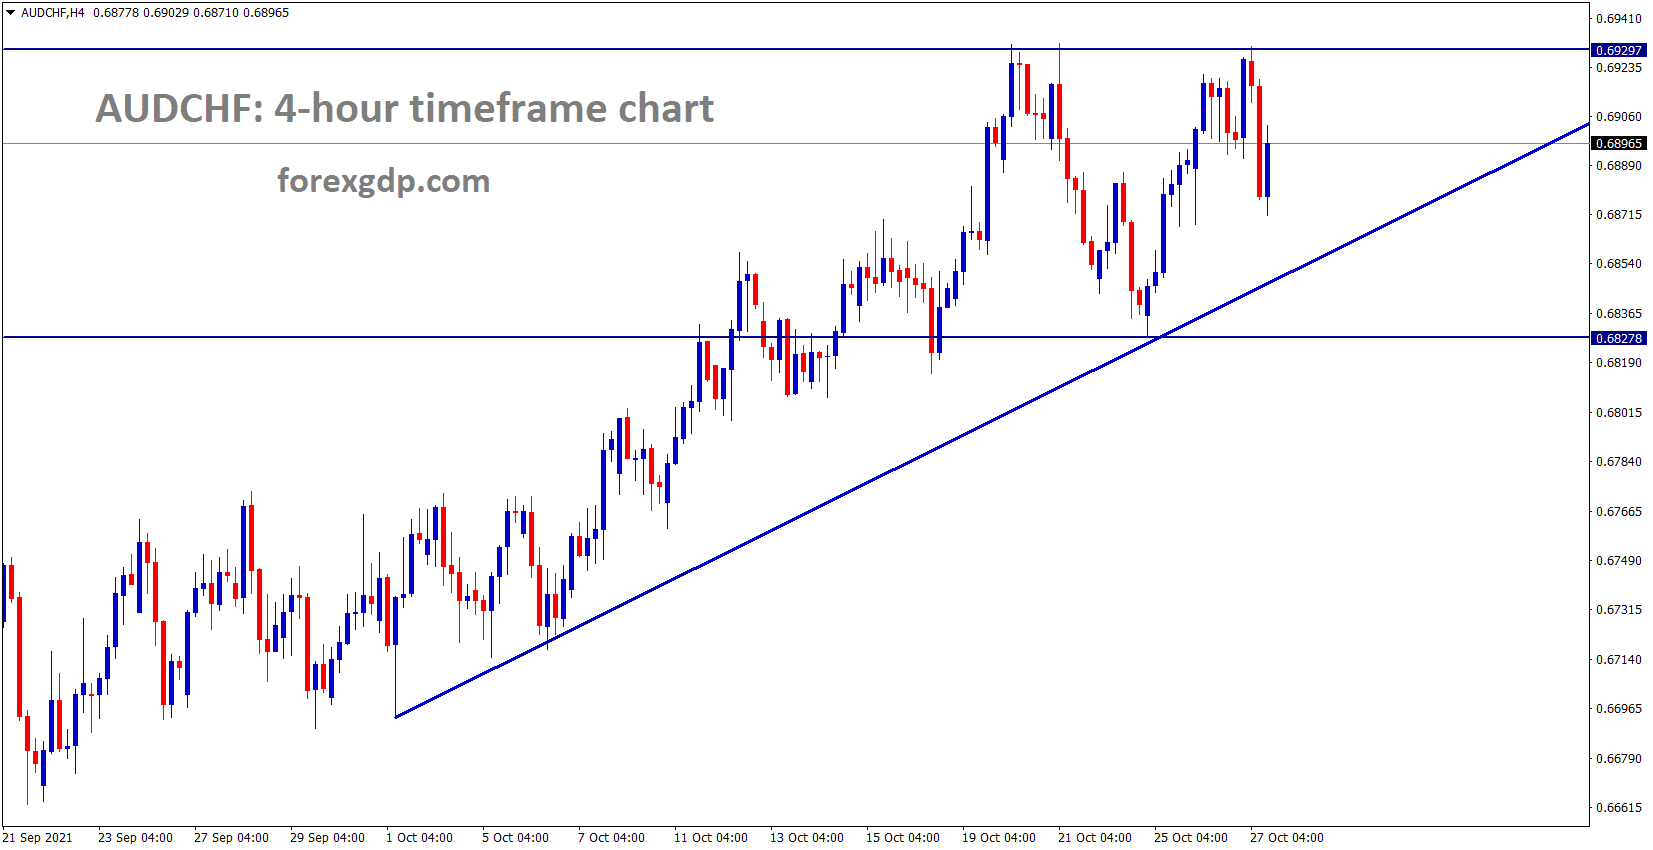 AUDCHF is Moving in a box pattern and rebounding from the Resistance area